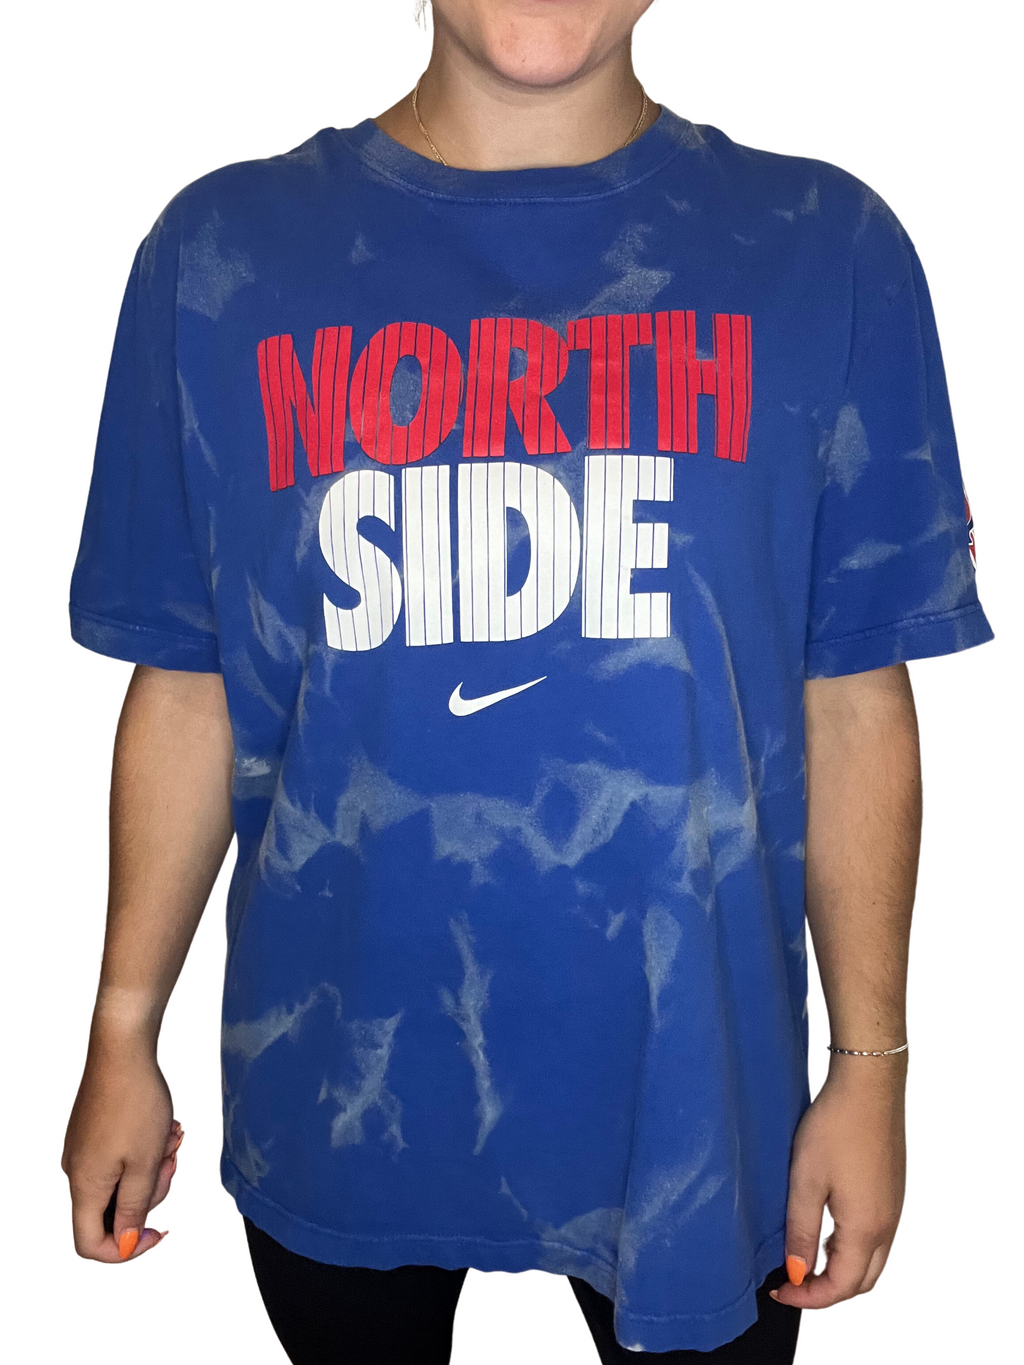 Chicago Cubs “North Side” Bleached Shirt